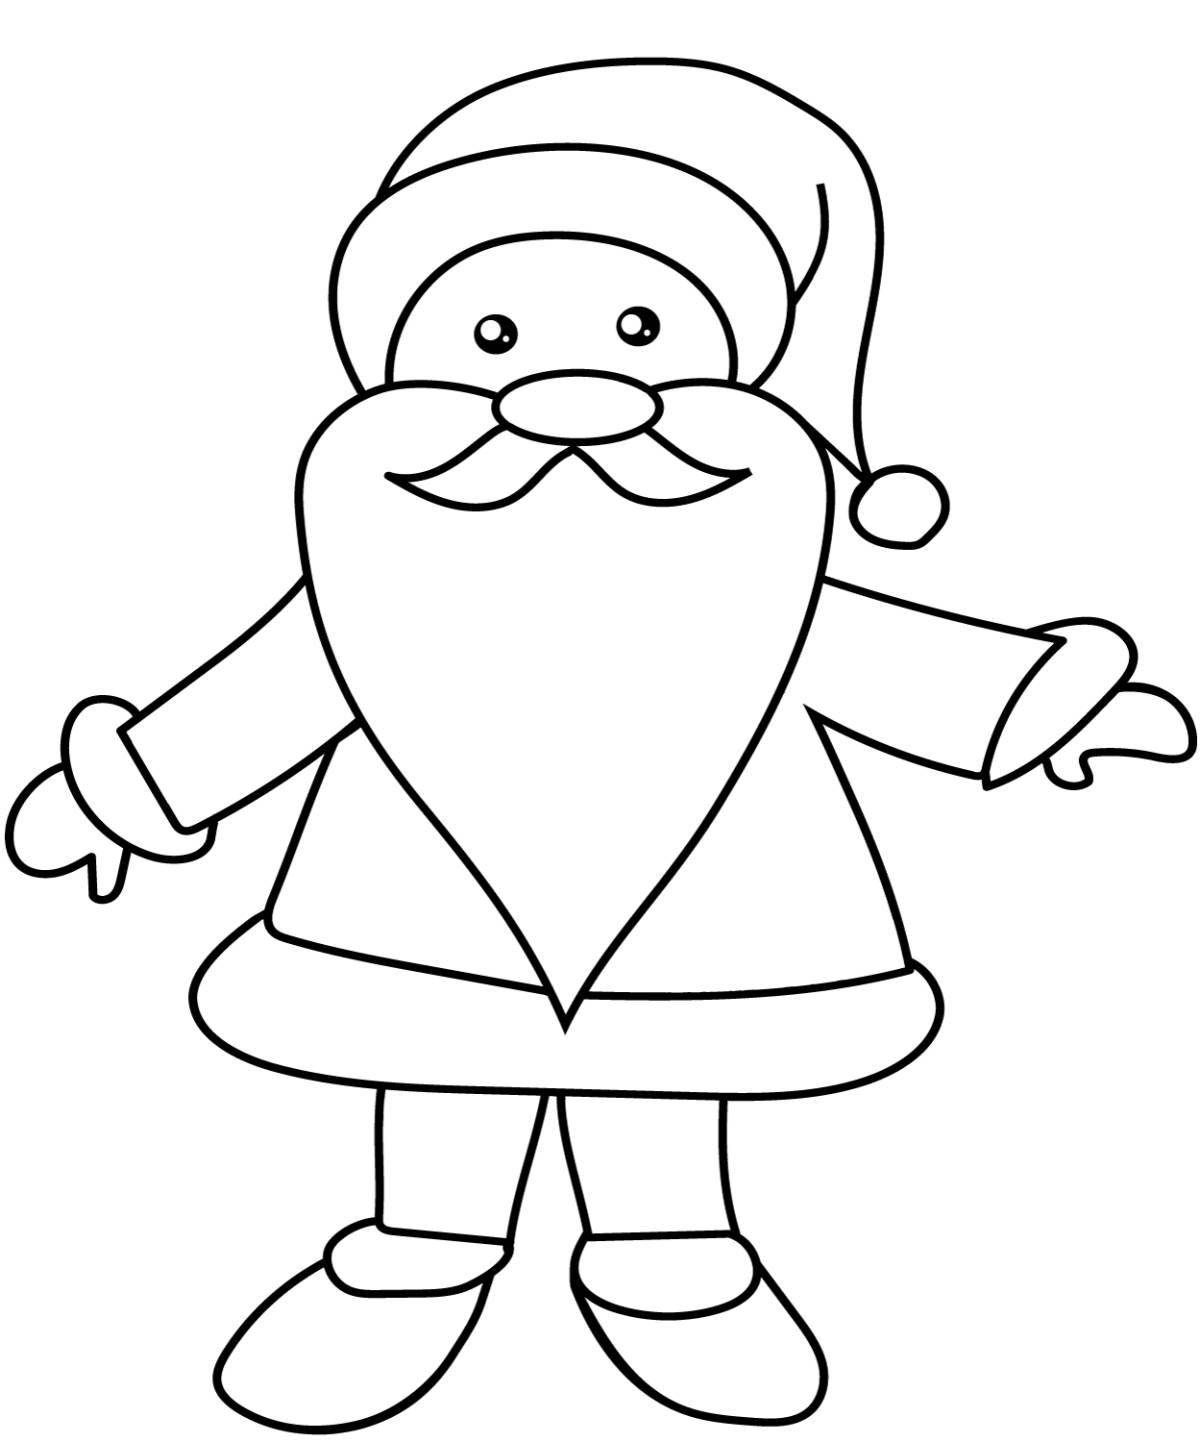 Dazzling coloring page 2 frost